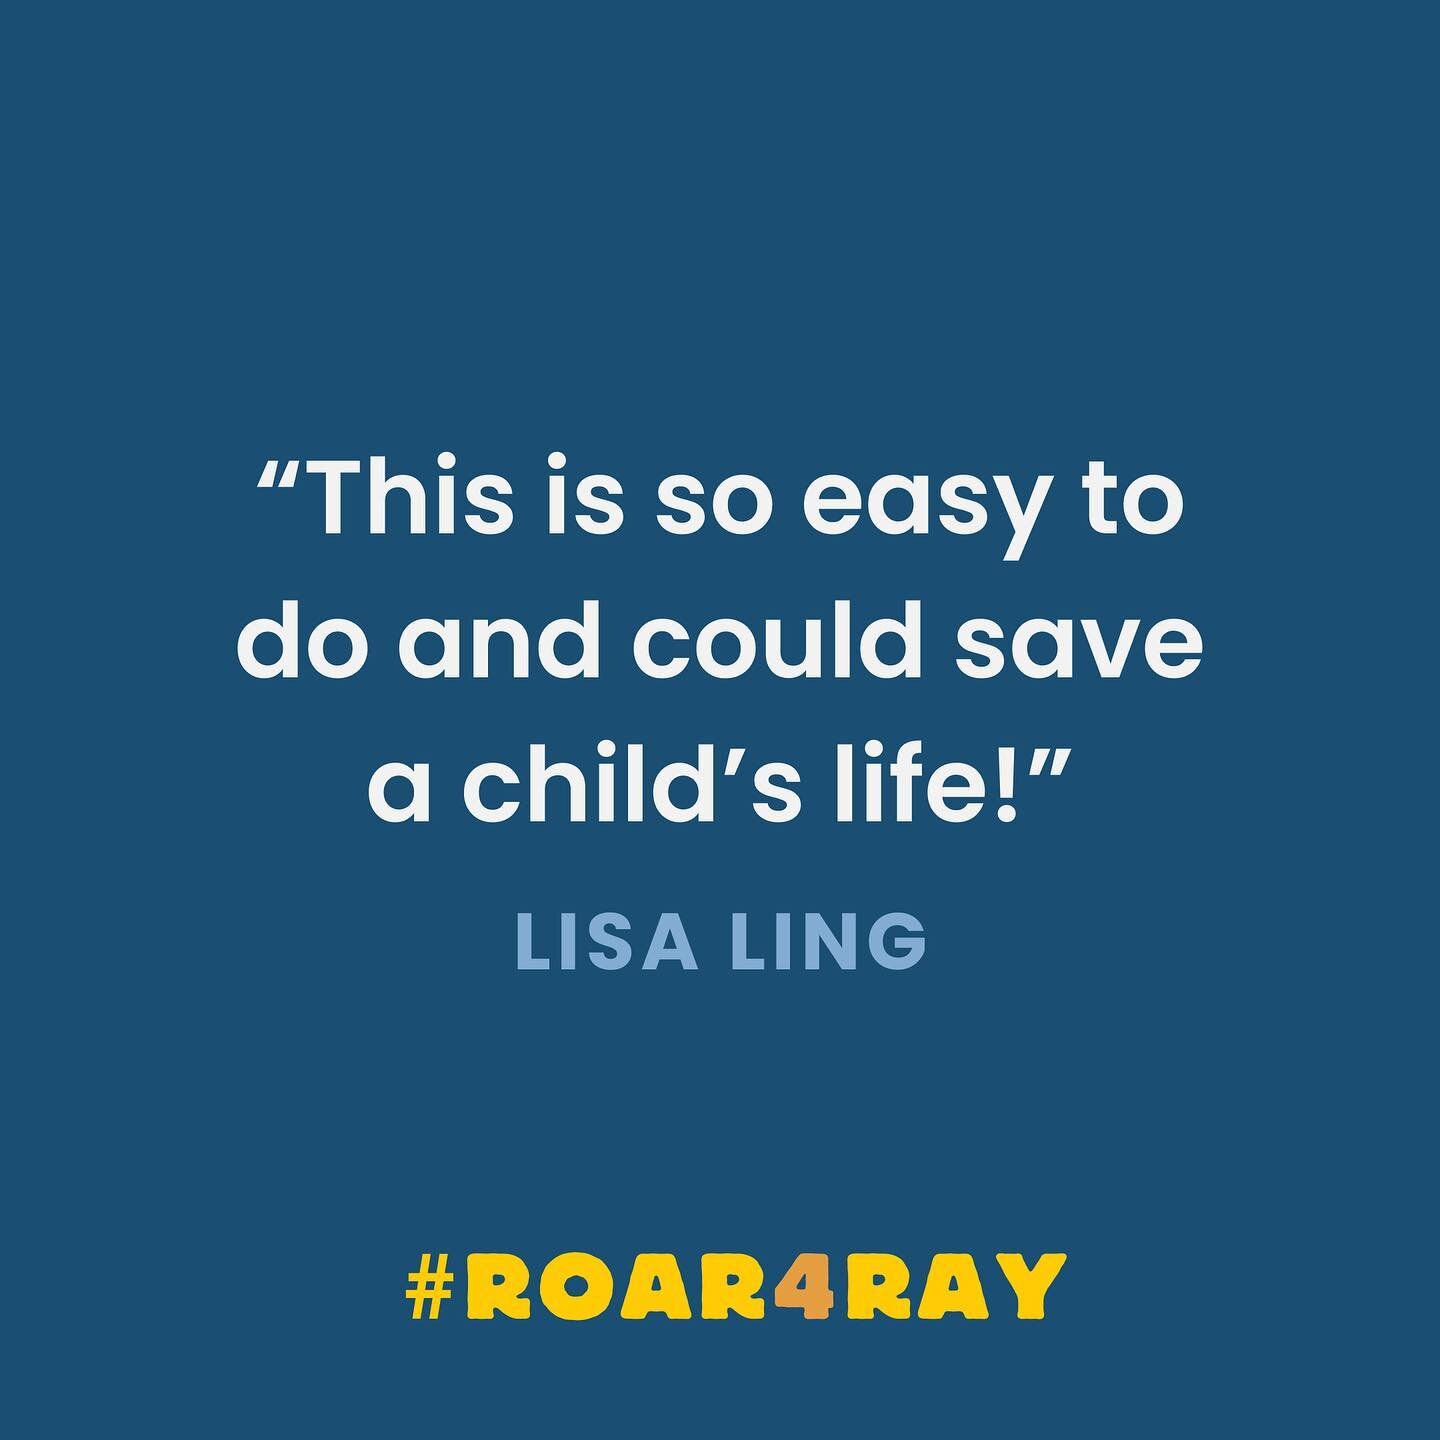 You&rsquo;re one simple step away from saving a child&rsquo;s life. Thanks for reminding us how easy and rewarding signing up for @bethematch with #Roar4Ray is, @lisalingstagram!

To learn more and sign up, visit the link in our bio.